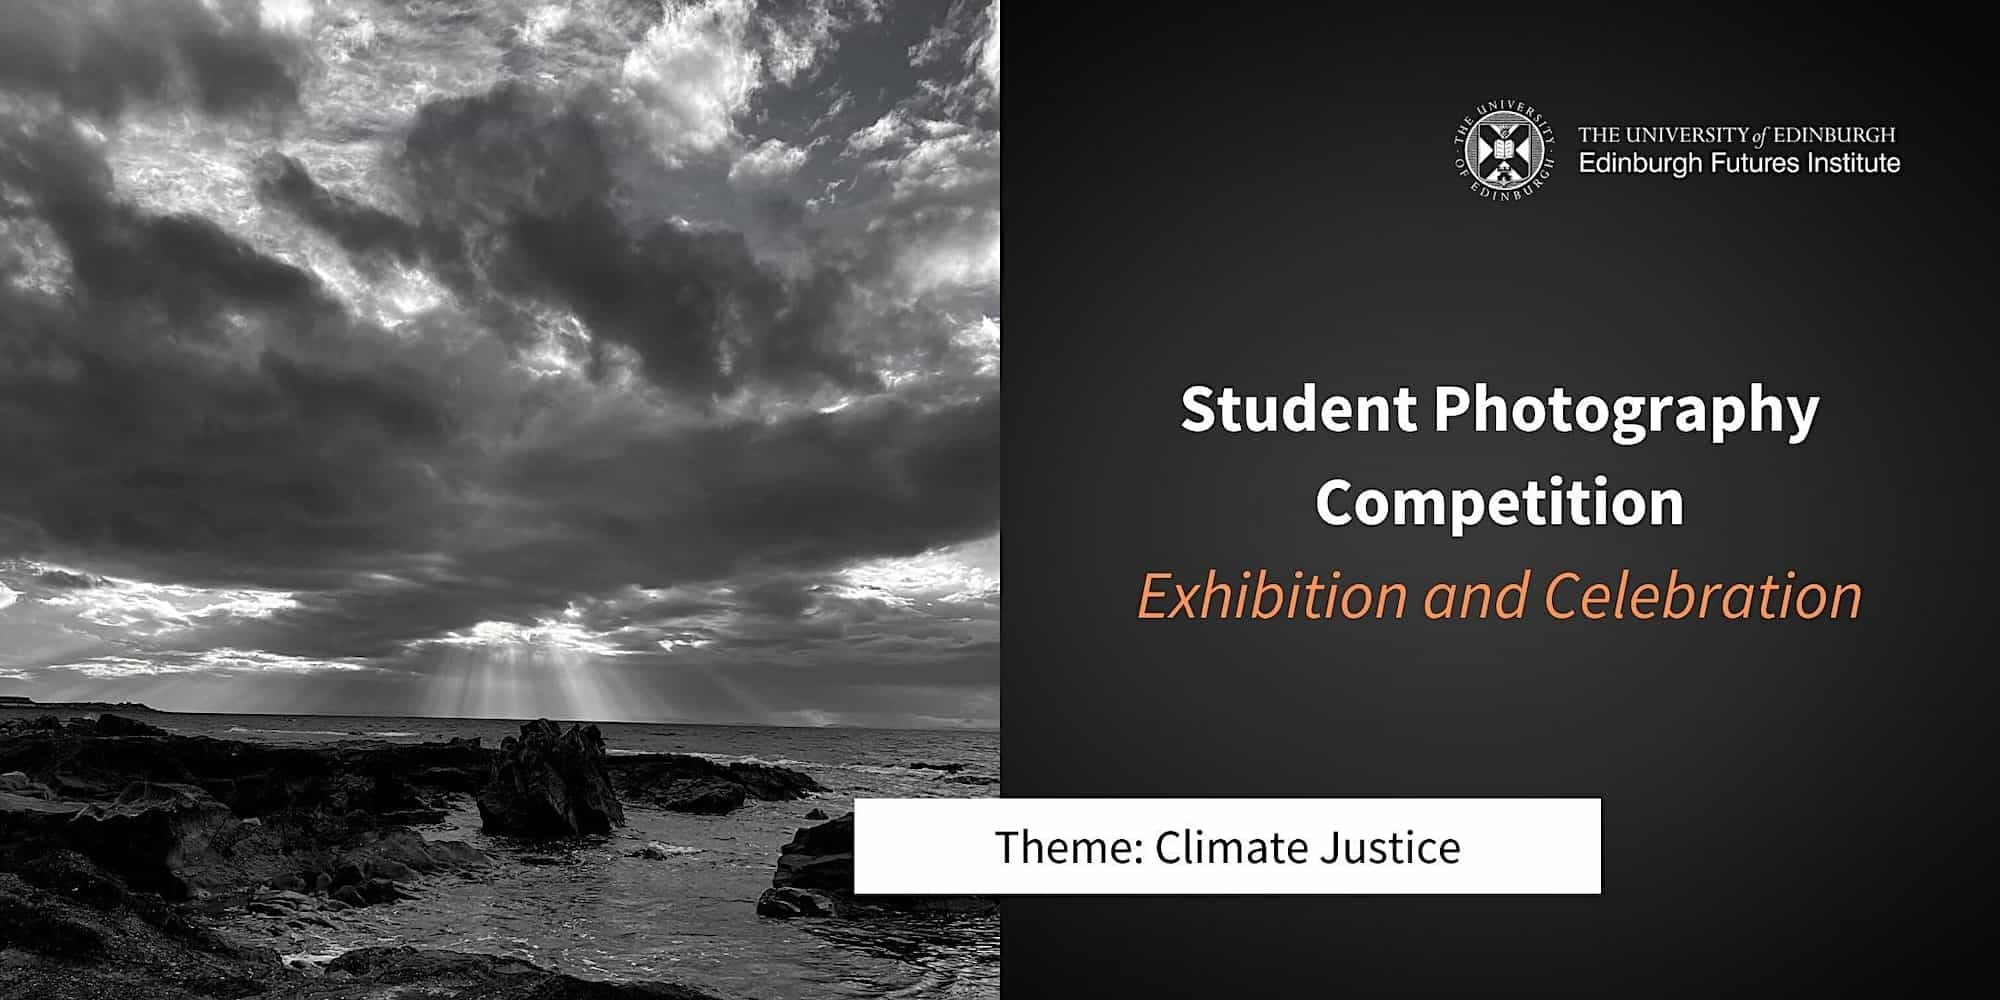 Black and white image of ocean and skies. Image text reads: Student Photography Competition: Exhibition and Celebration. Theme: Climate Justice. Includes logo of the Edinburgh Futures Institute.